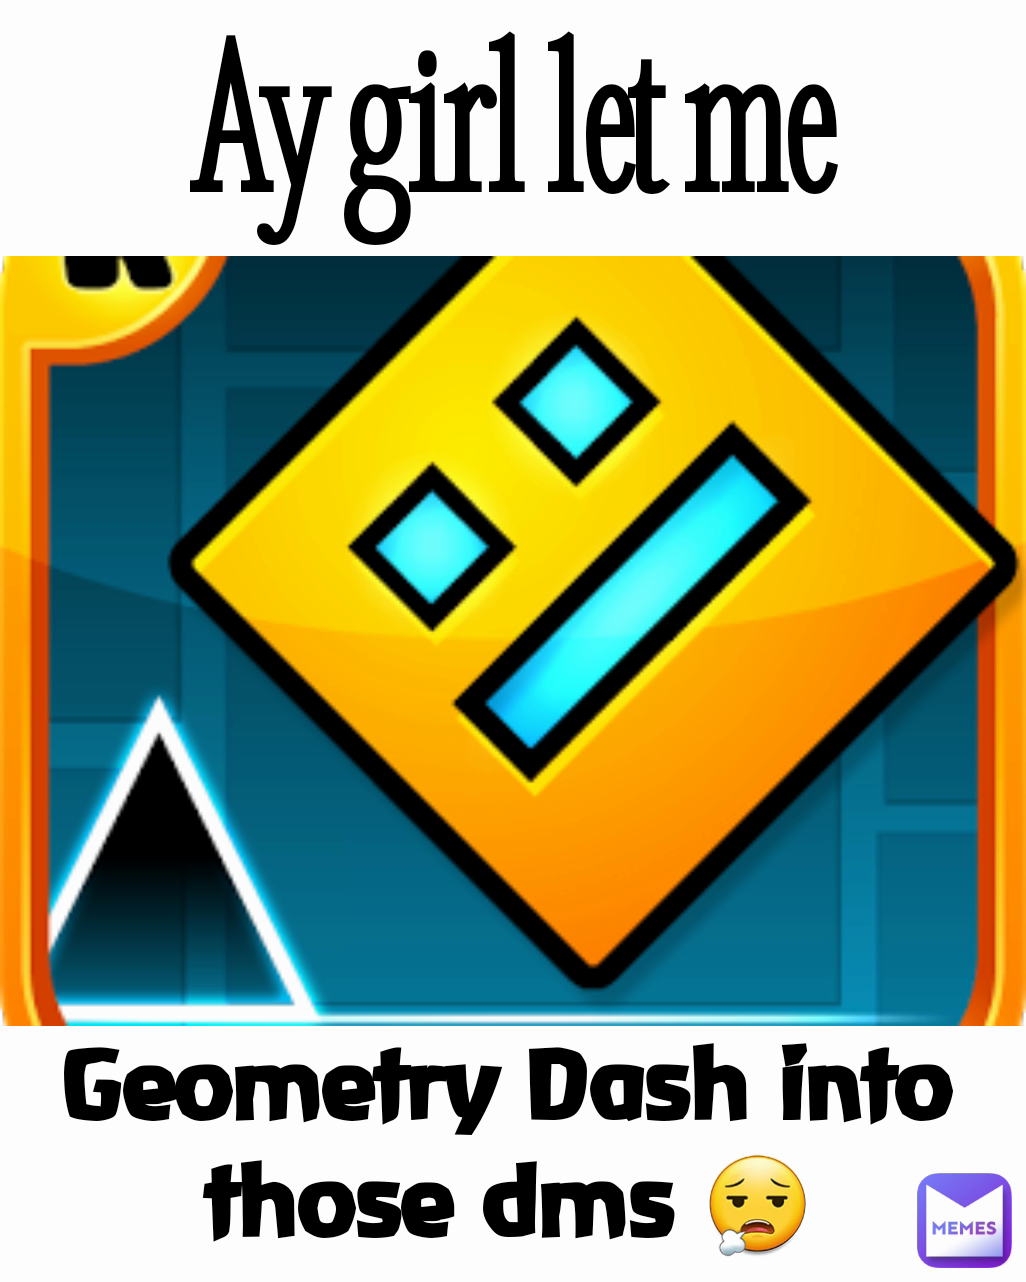 Ay girl let me Geometry Dash into those dms 😮‍💨